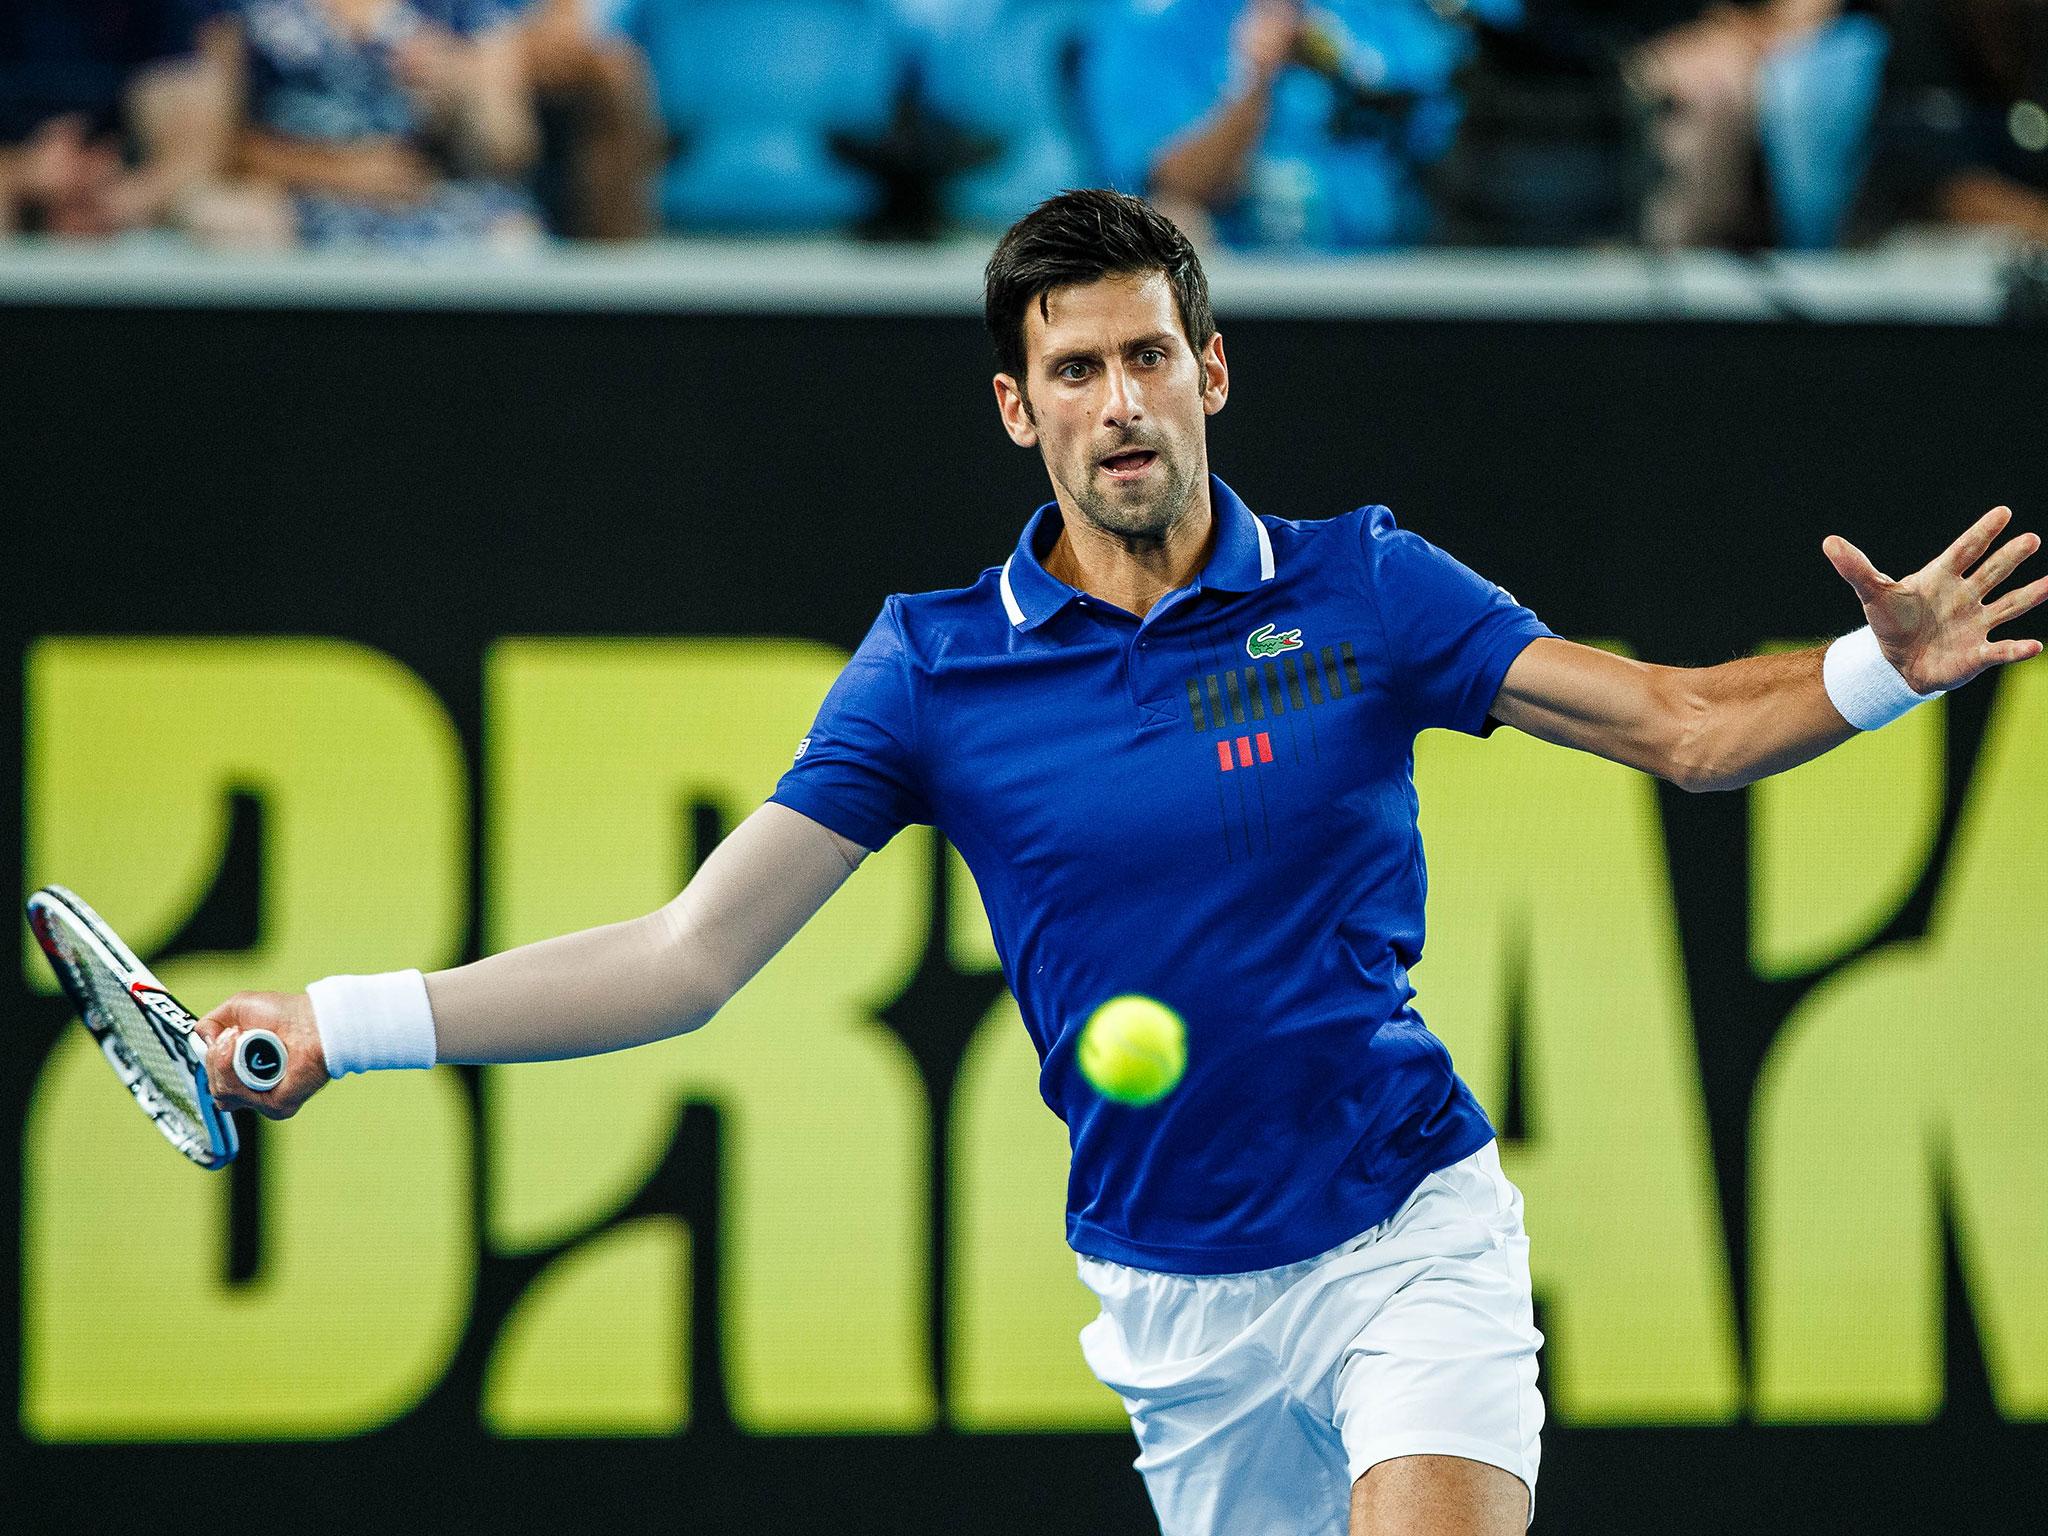 Novak Djokovic told players in Melbourne that he wants to form a breakaway players' union